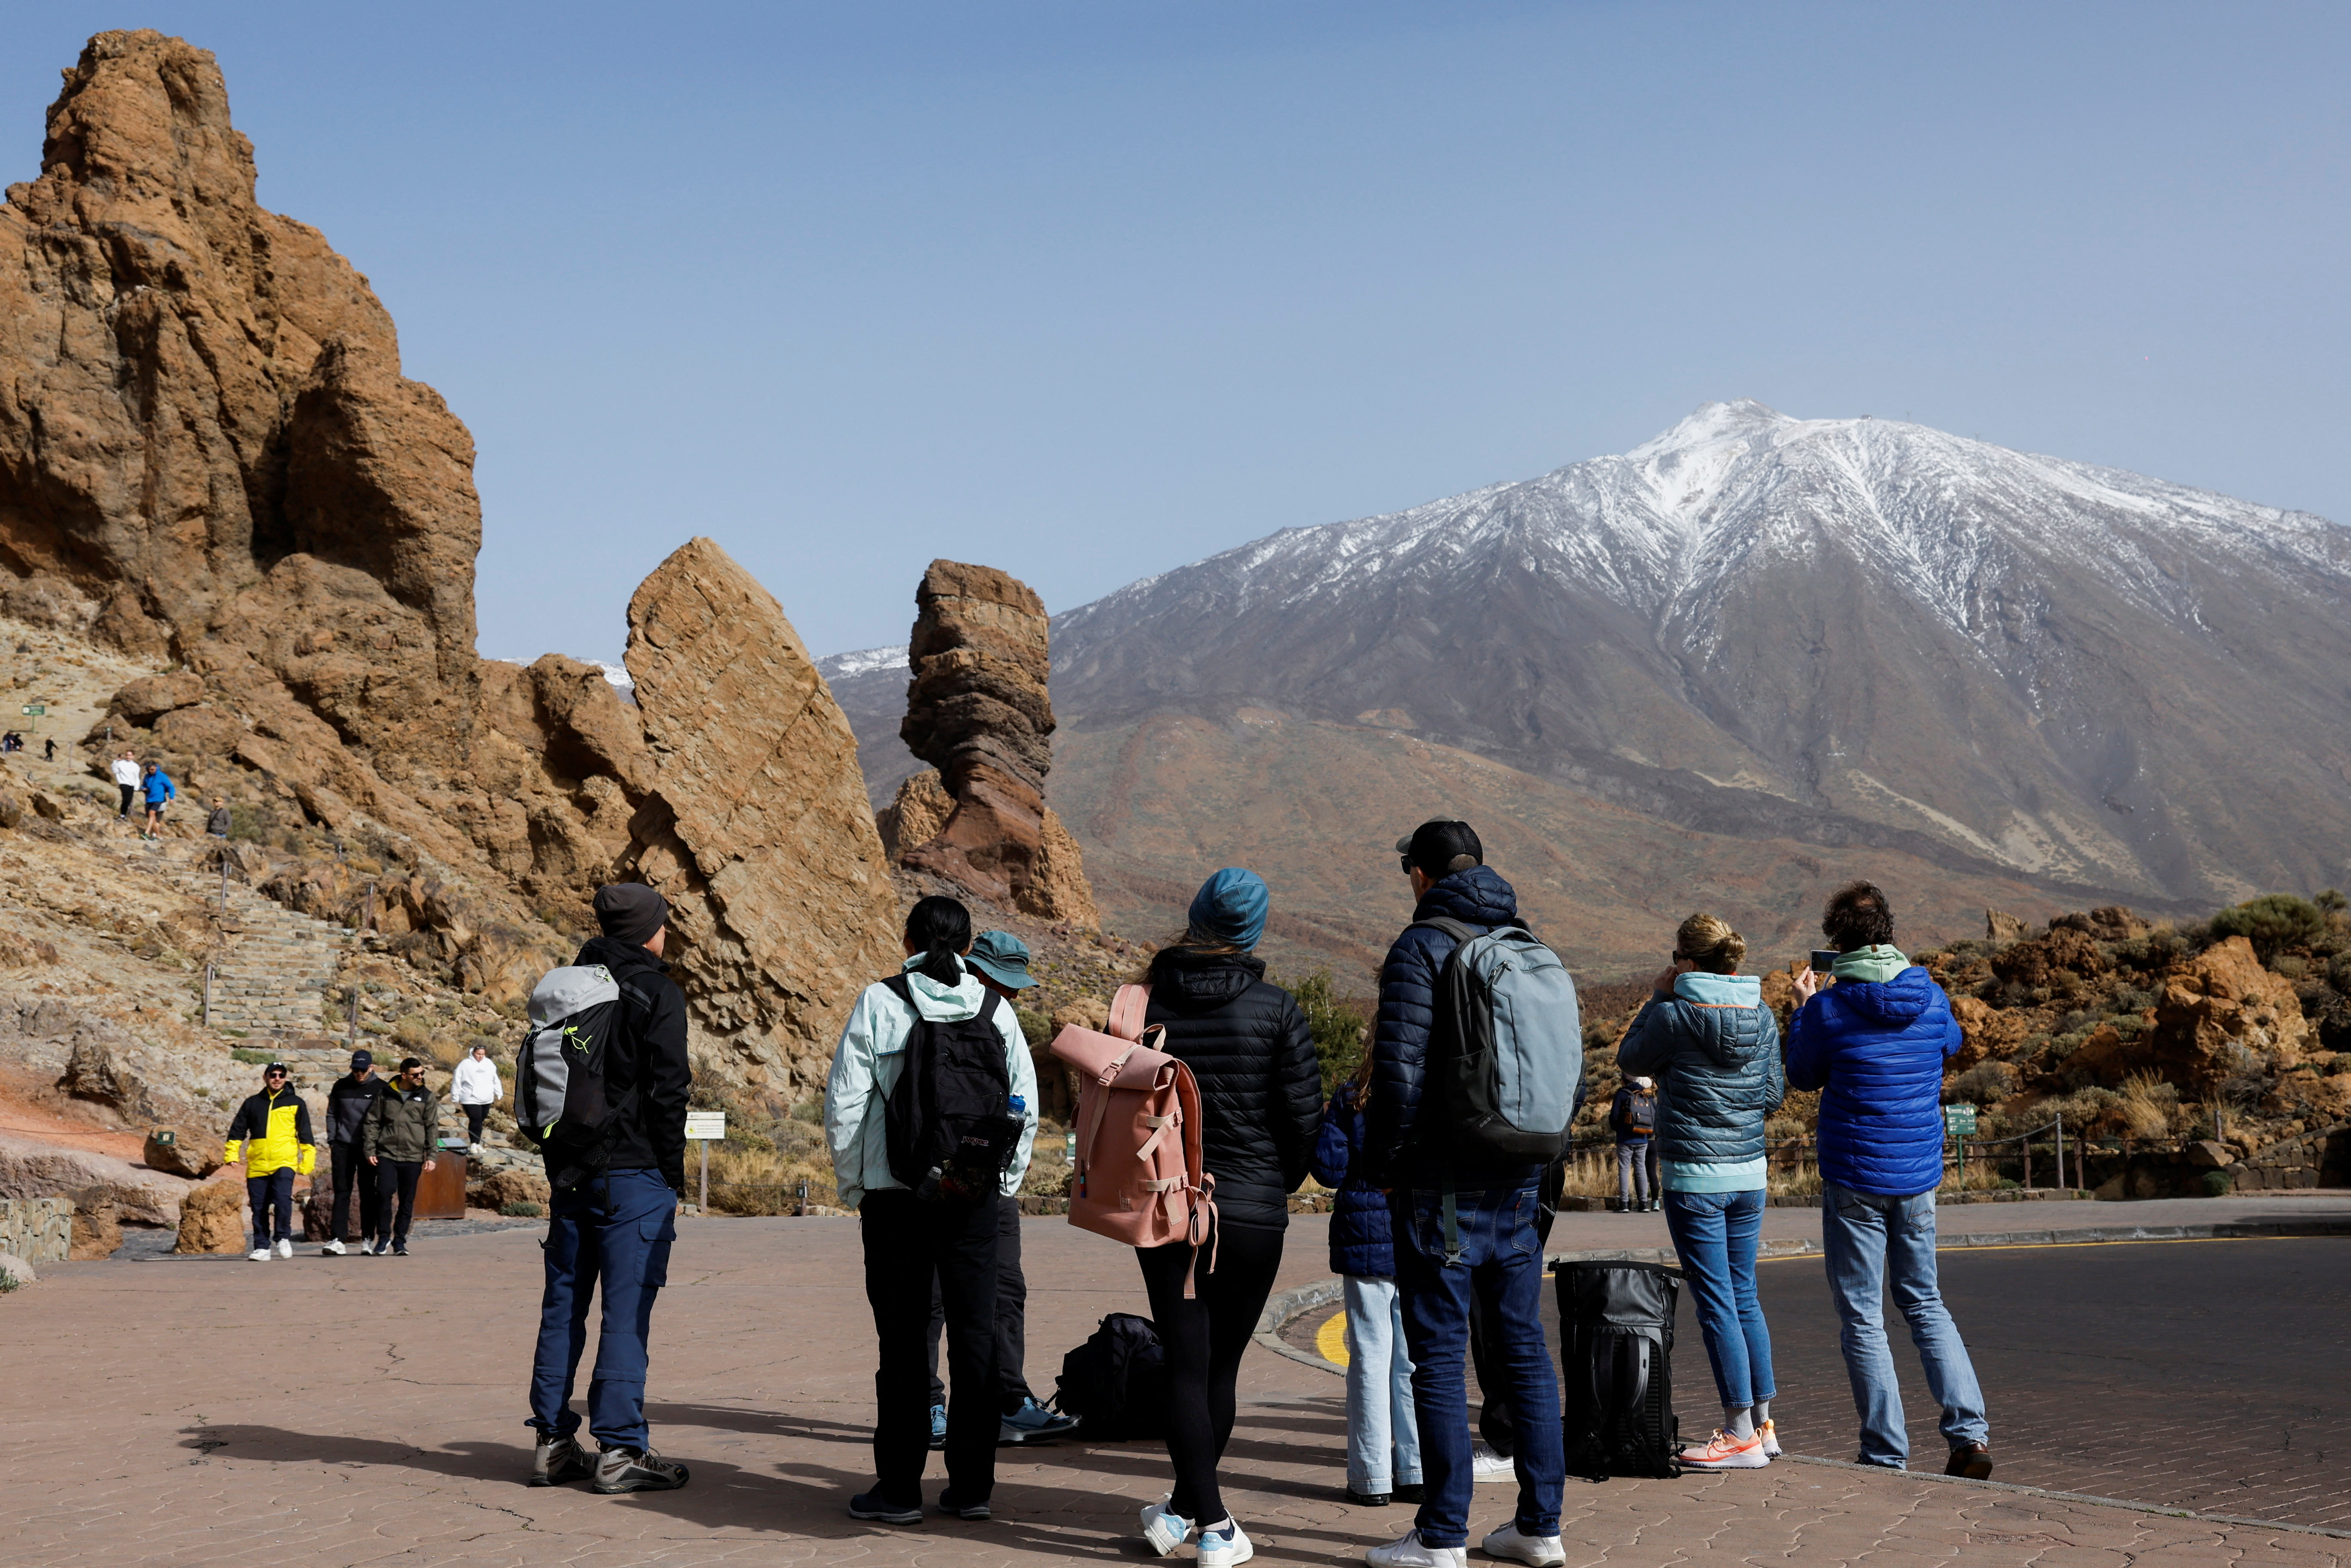 The Teide mountain appears snowy after the heavy rains of recent days on the island of Tenerife